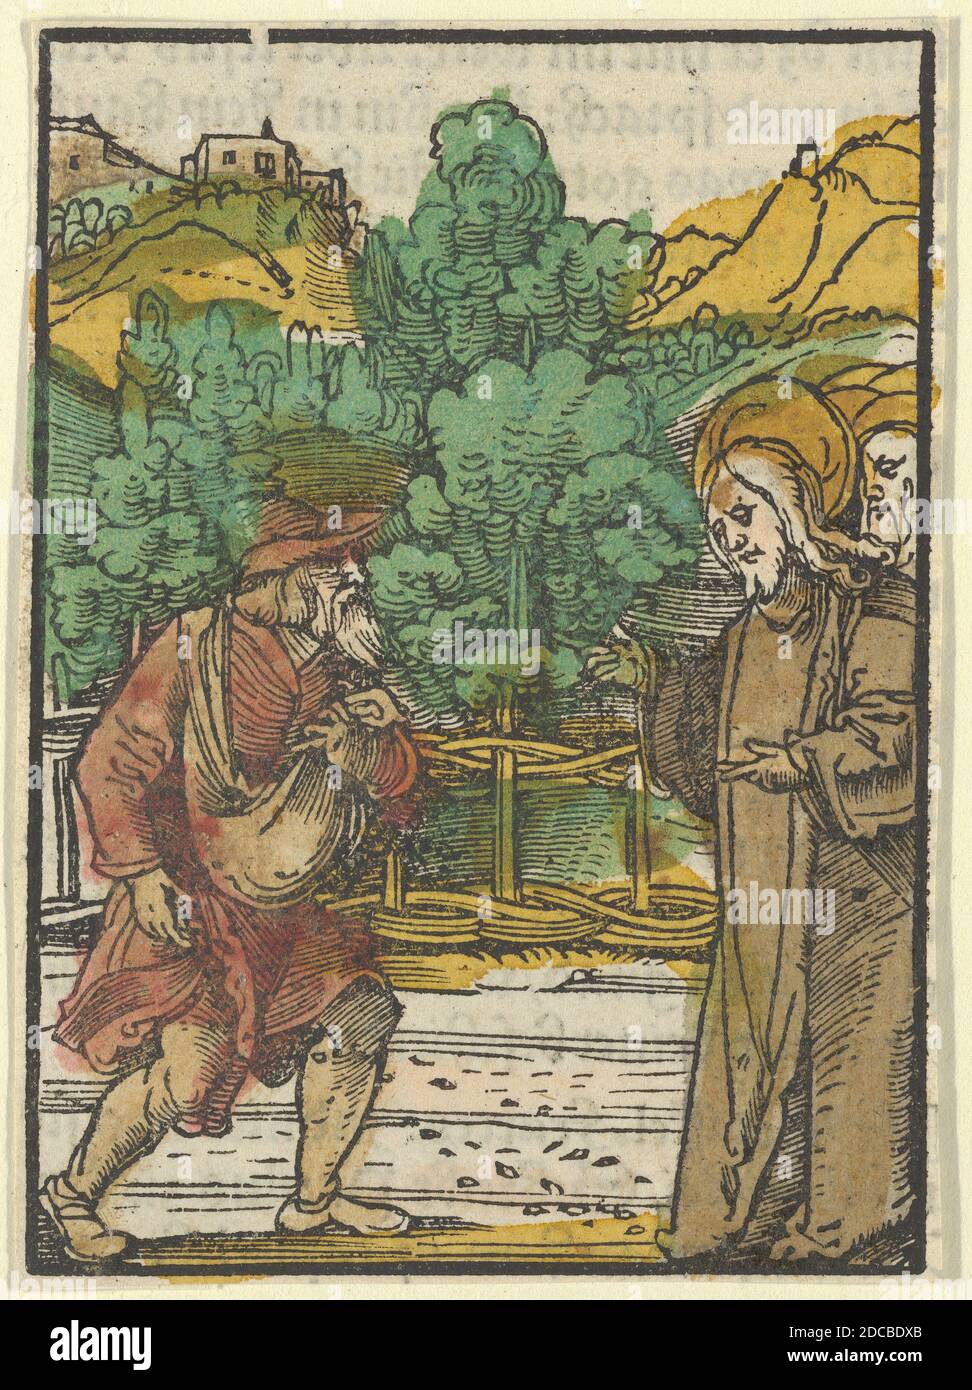 The Parable of the Sower, from Das Plenarium, 1517. Stock Photo